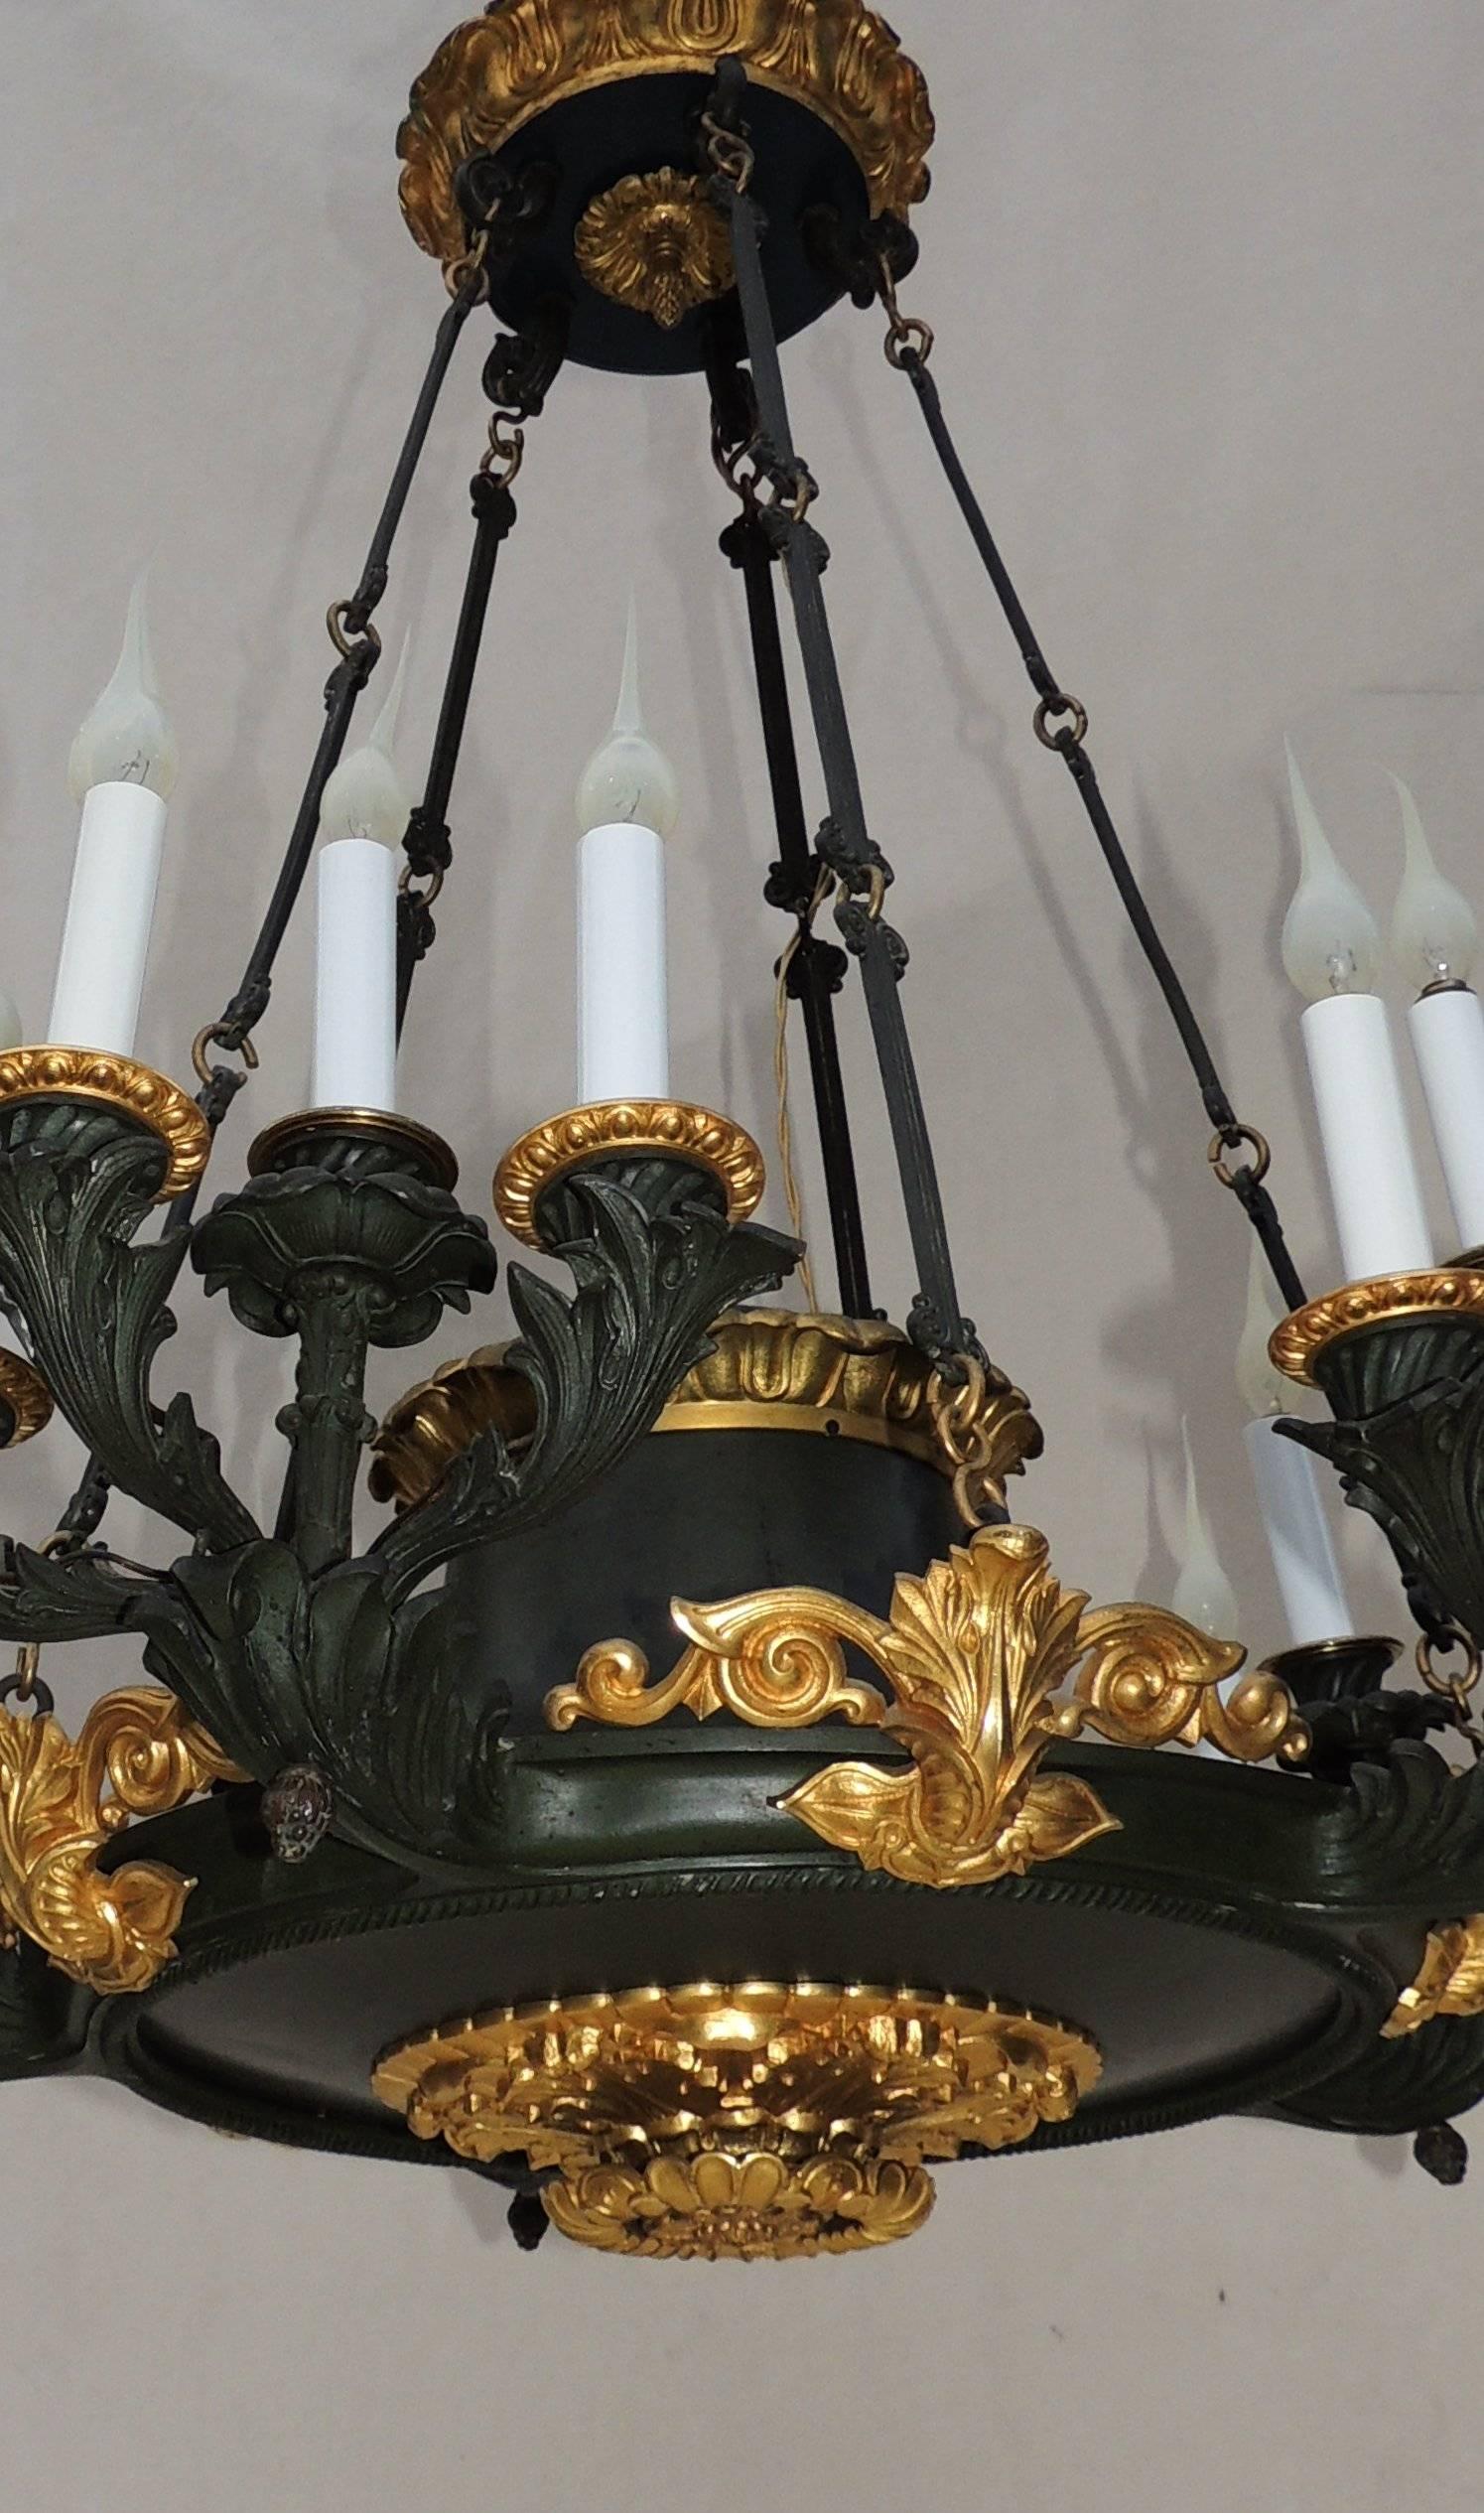 Early 20th Century Palatial French Empire Doré Bronze and Patinated Neoclassical Chandelier Fixture For Sale